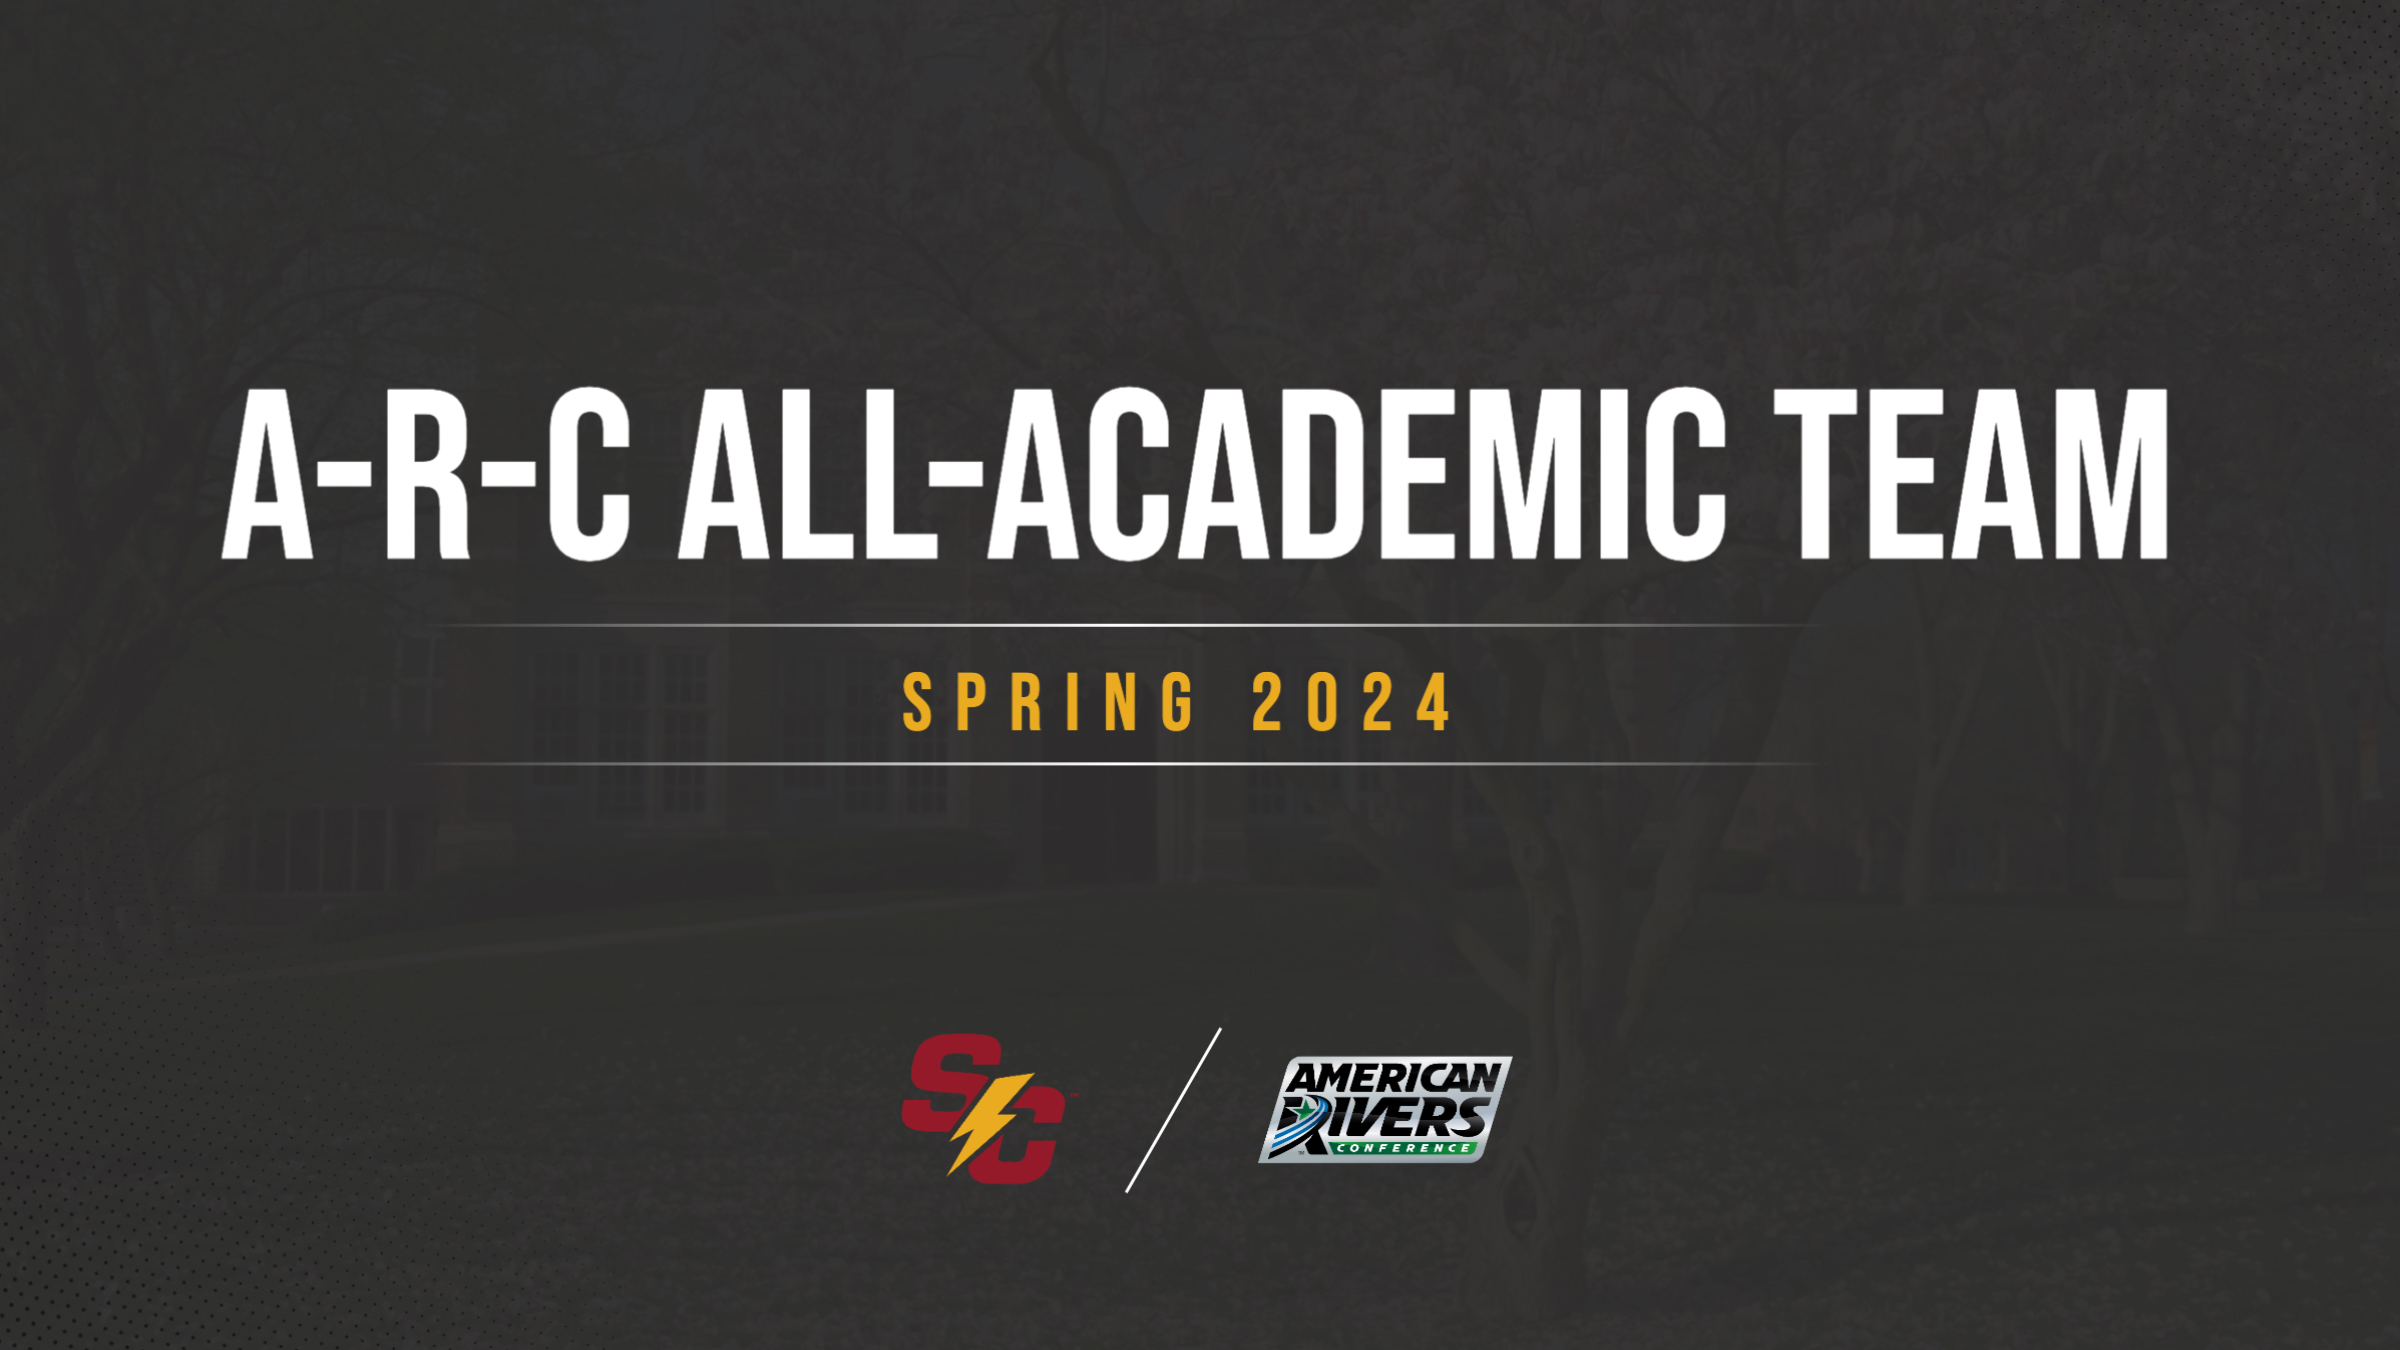 Seventy-two student-athletes tabbed as A-R-C All-Academic honorees